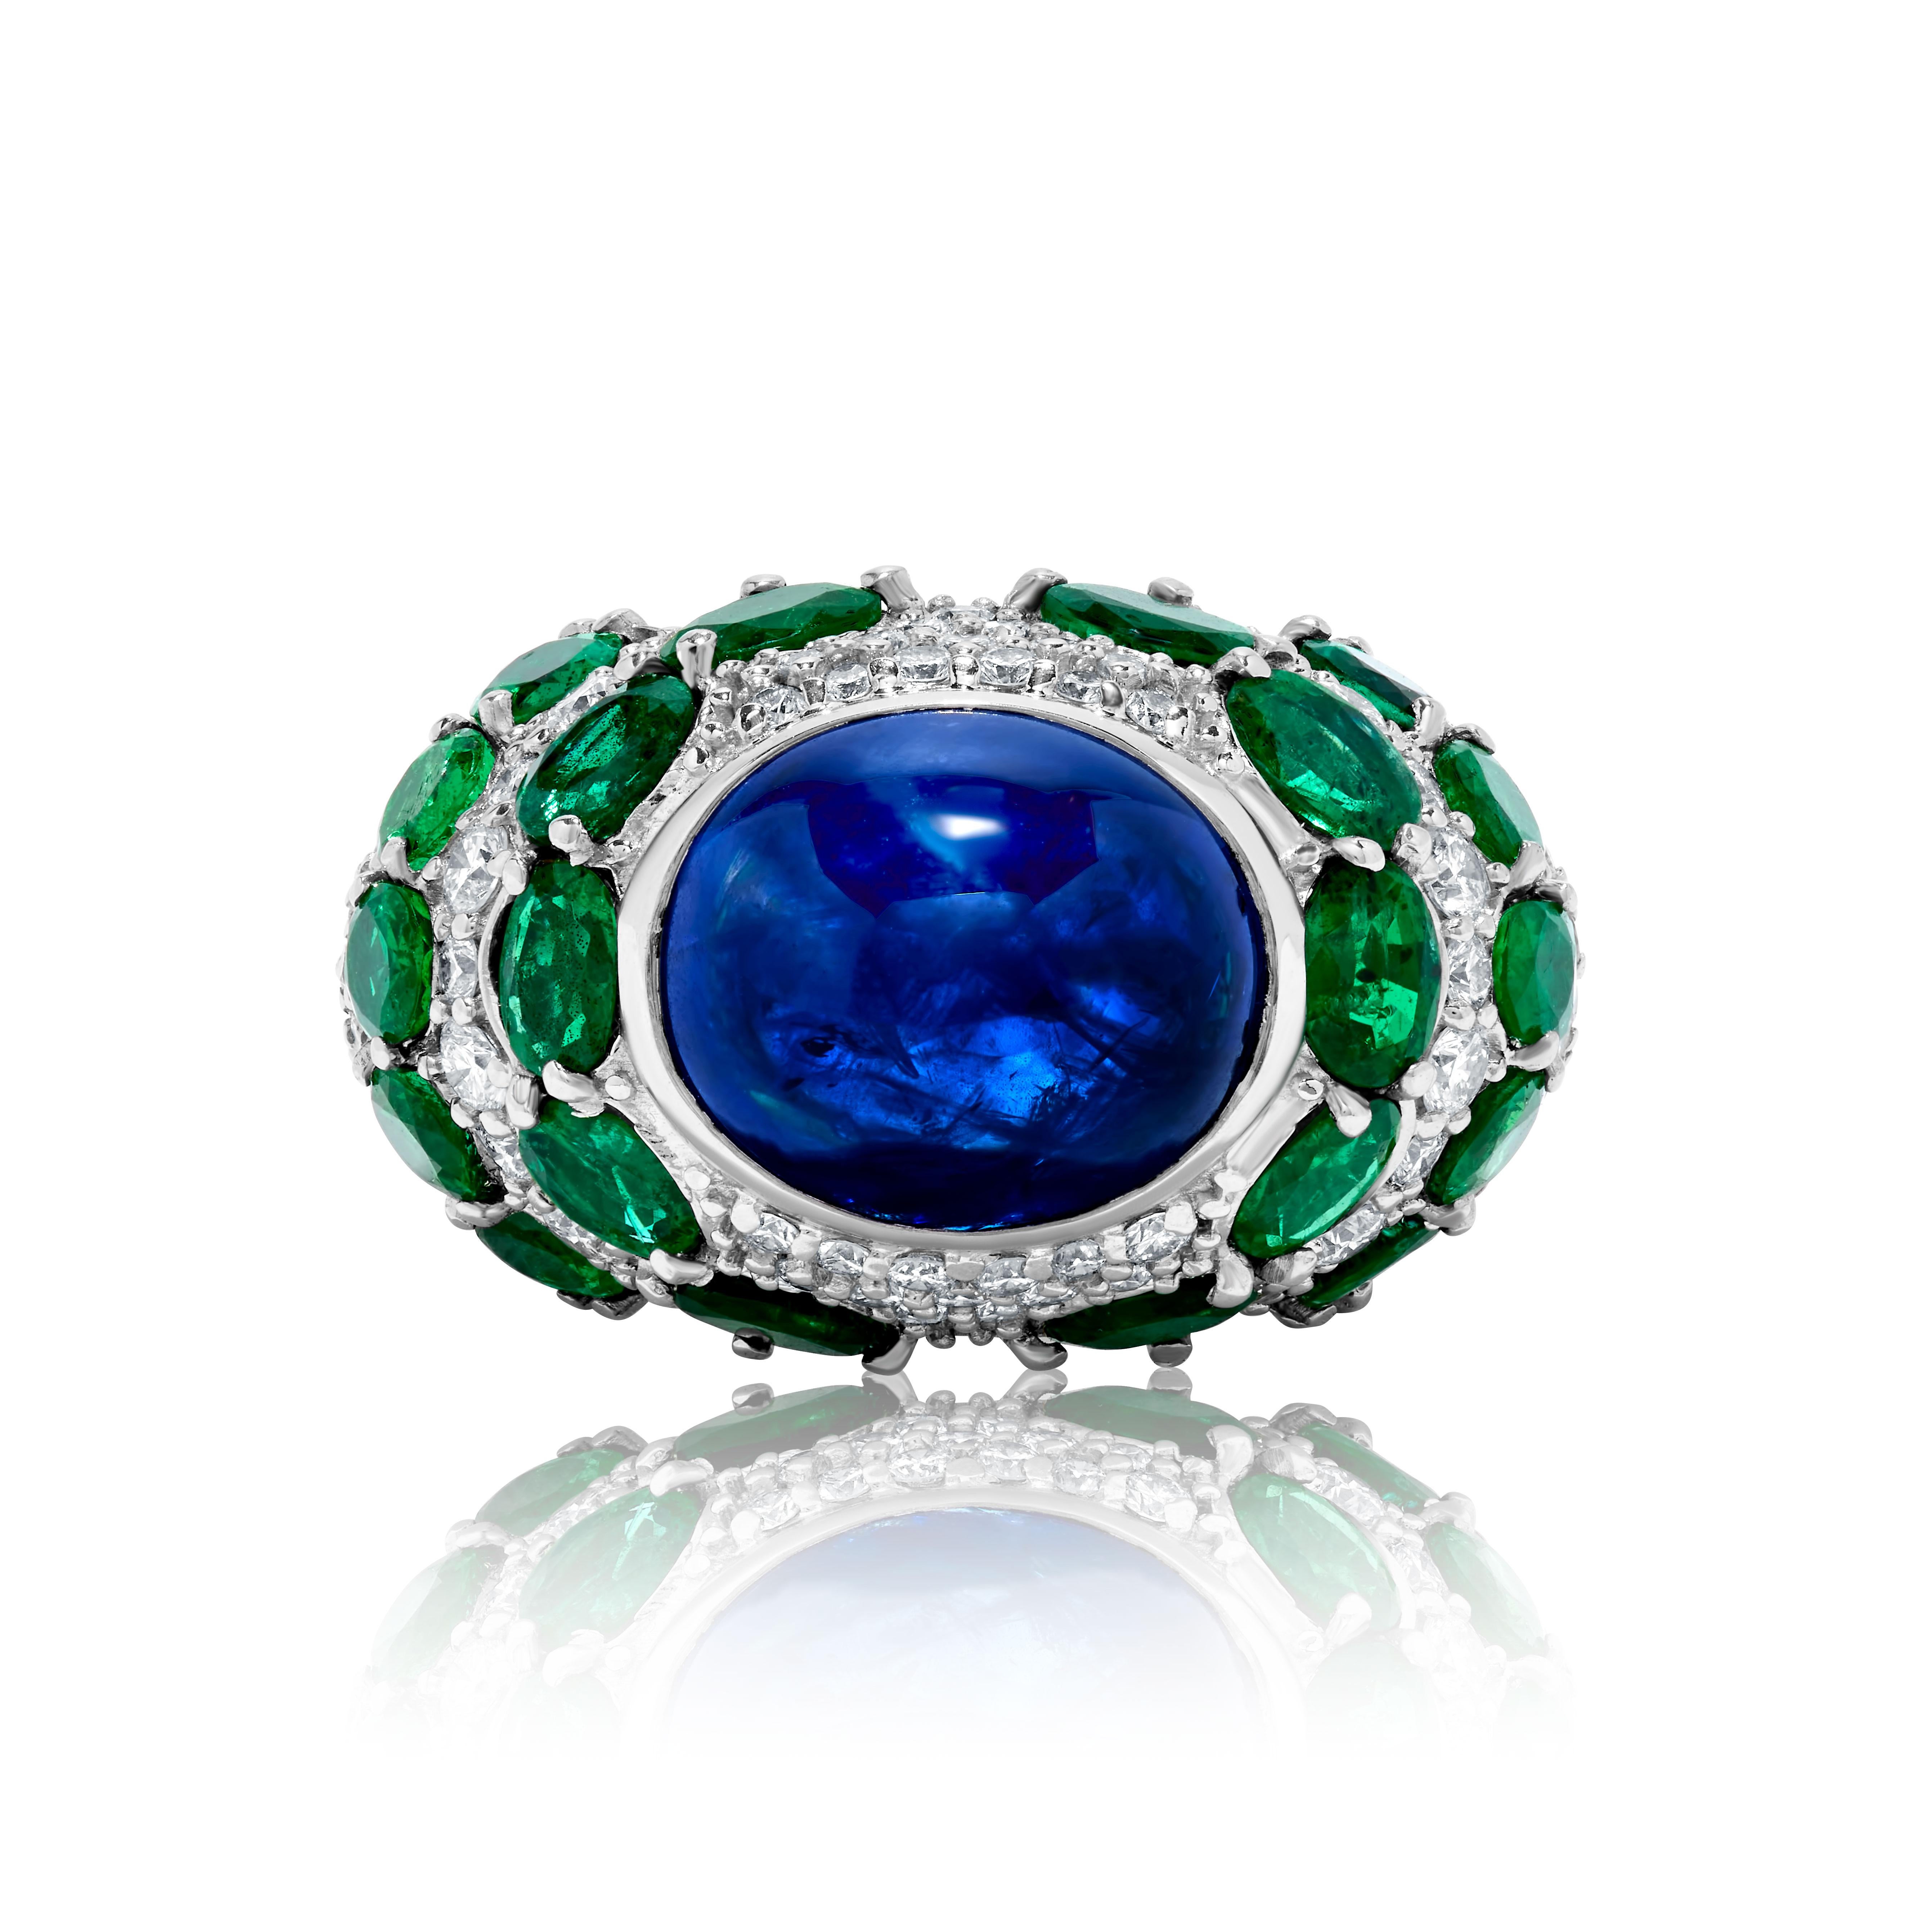 Andreoli Blue Sapphire Cabochon Ceylon Cert Emerald Diamond 18K White Gold Ring

This ring features:
- 1.36 Carat Diamond
- 5.07 Carat Emerald
- 12.50 Carat Blue Sapphire Cabochon Ceylon Certified
- 18.03 Gram 18K White Gold
- Made In Italy